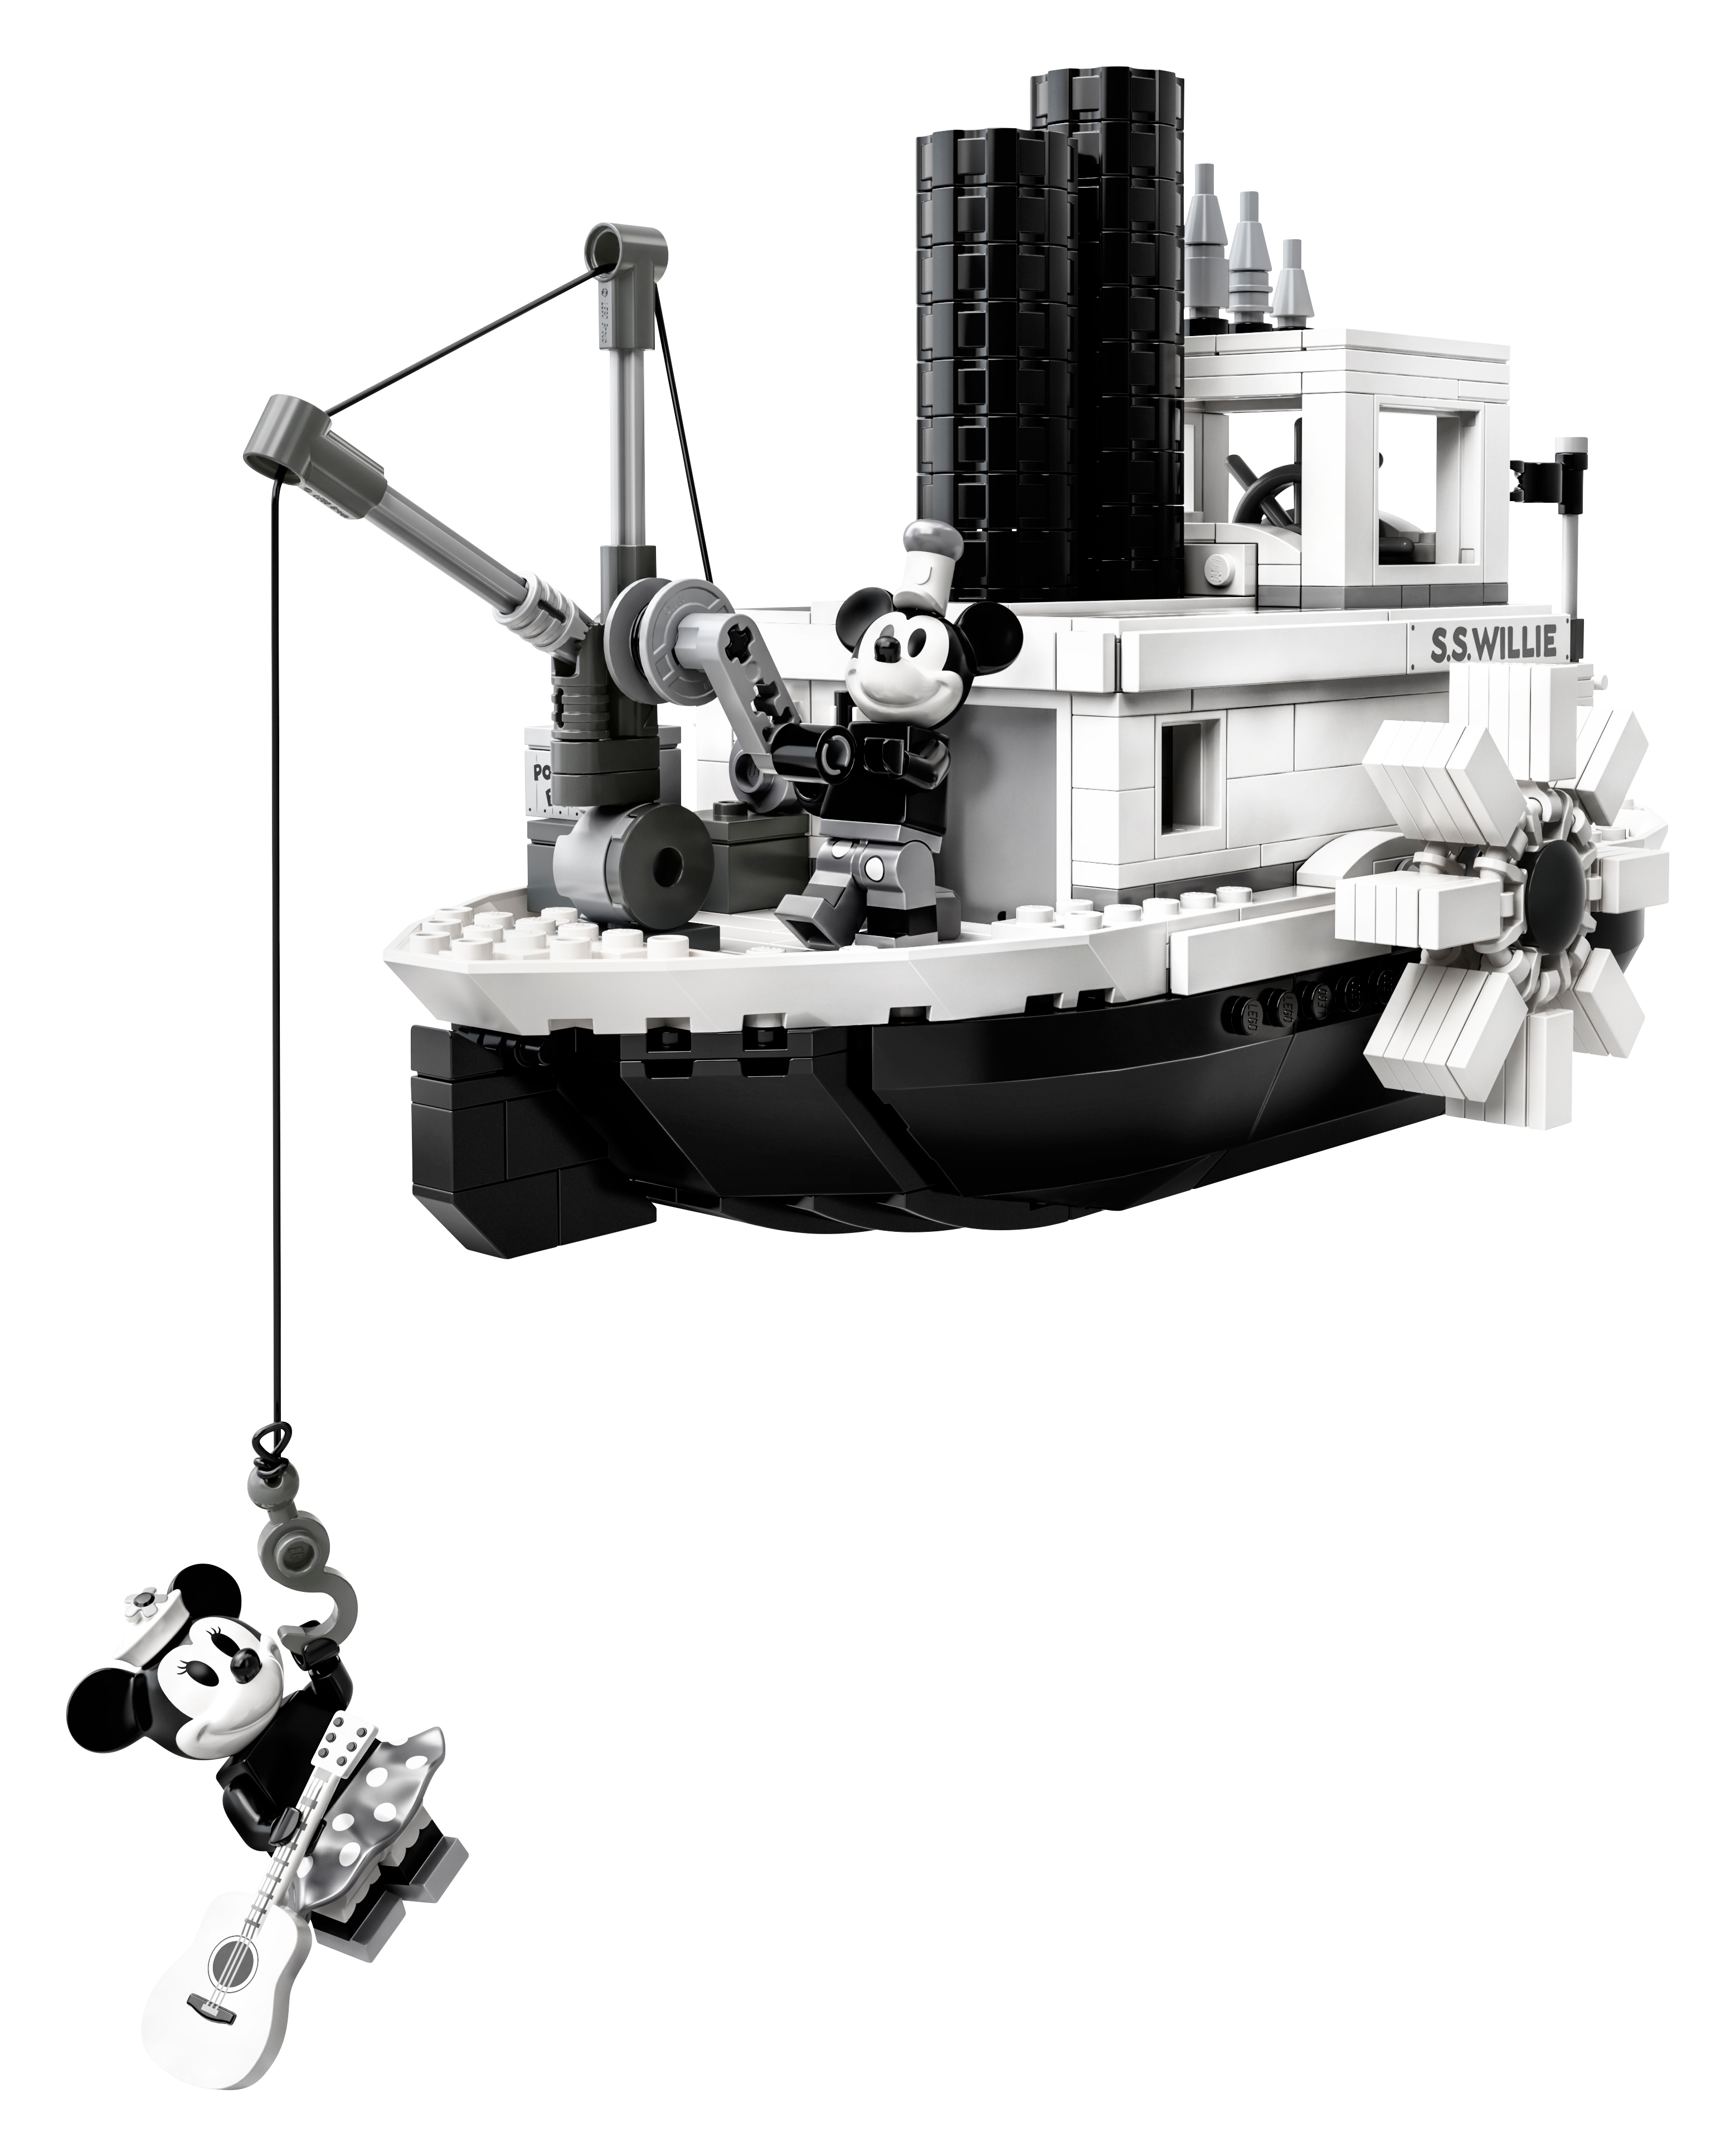 Sealed Mickey Mouse Vintage Collector's Model LEGO 21317 Steamboat Willie 